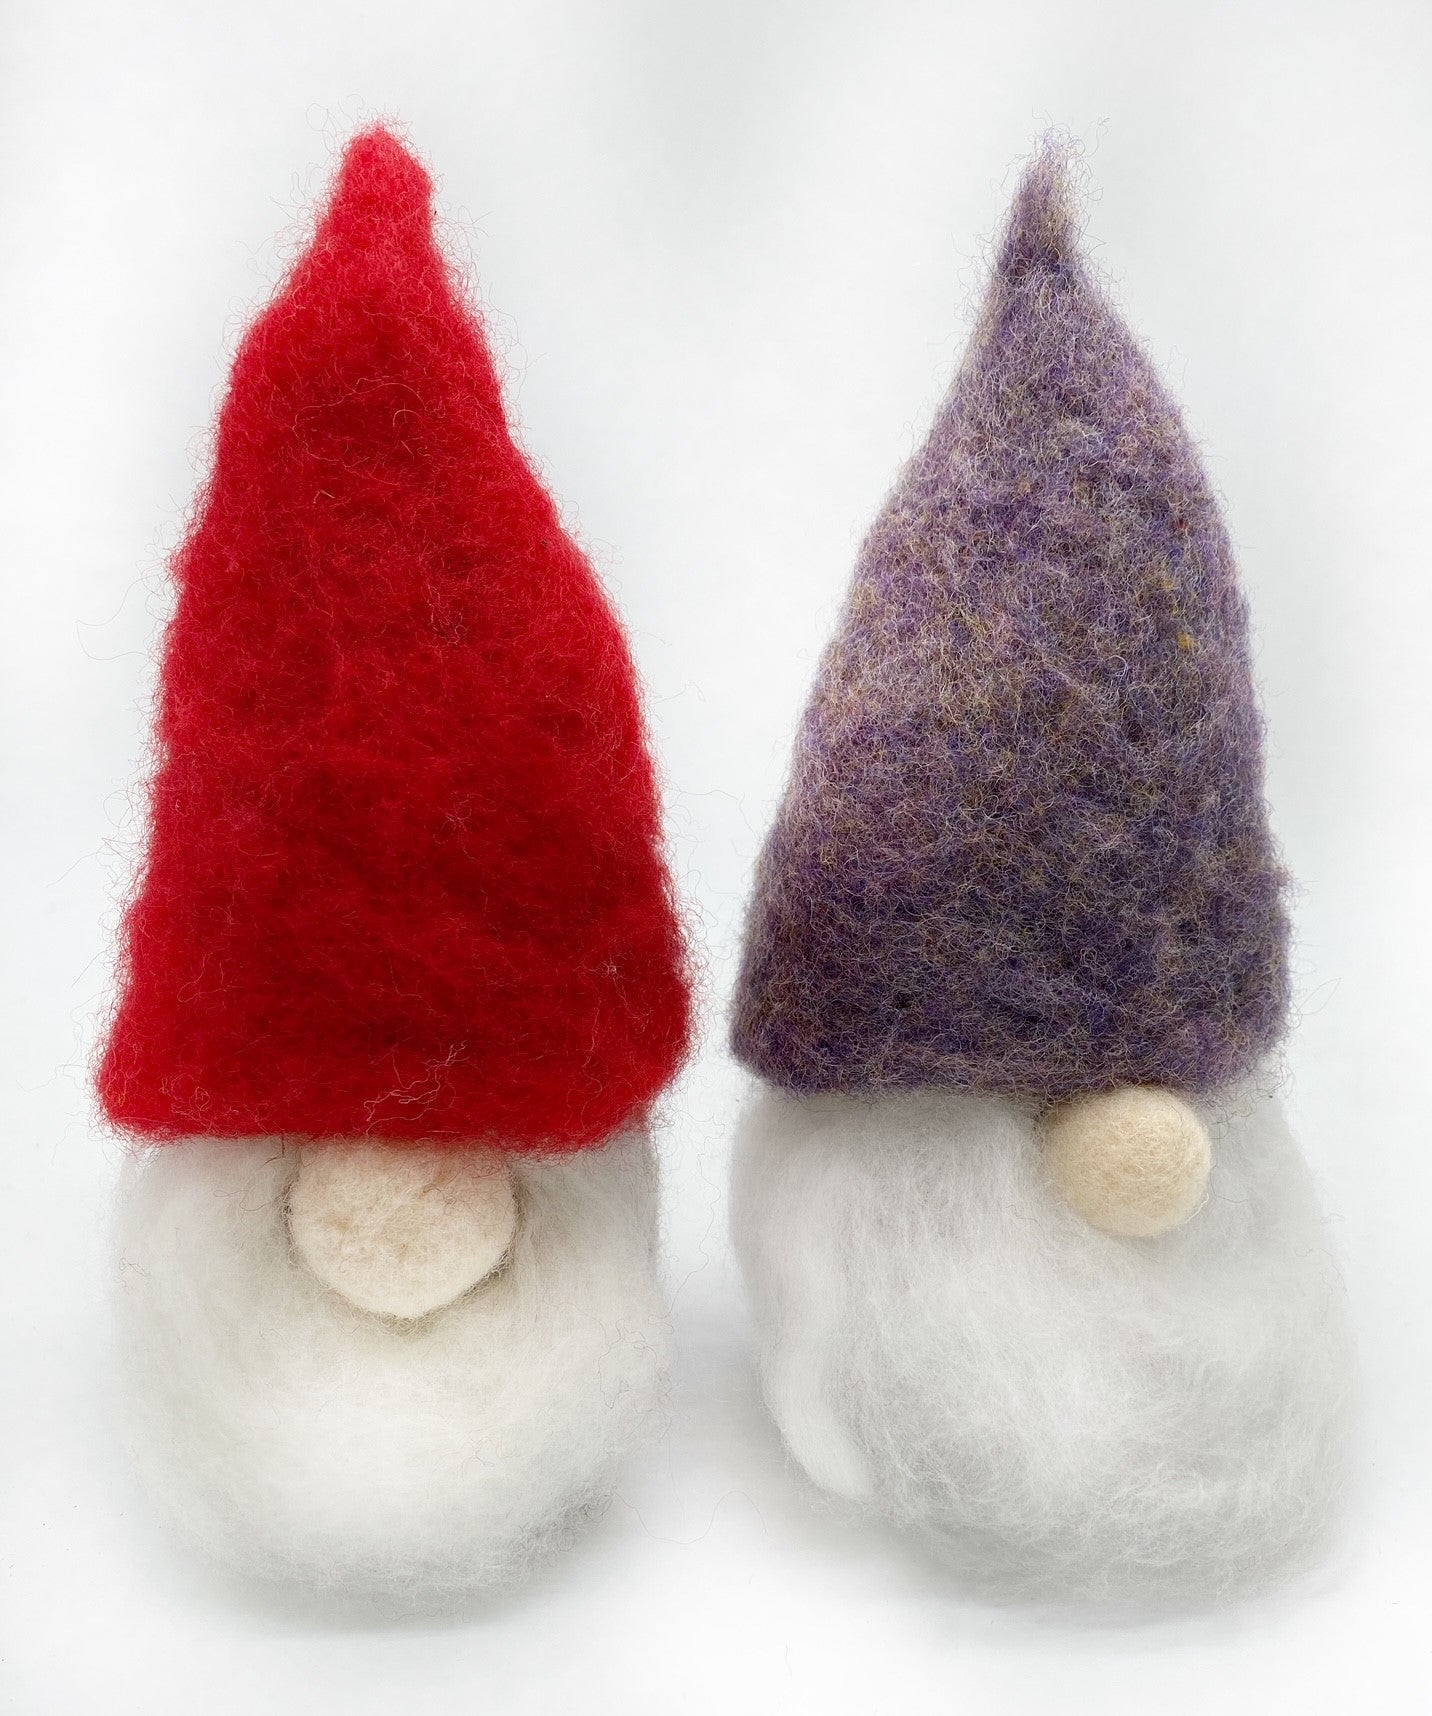 Garden Gnome Felting kit - Wool and Instructions only - Okanagan Dye Works